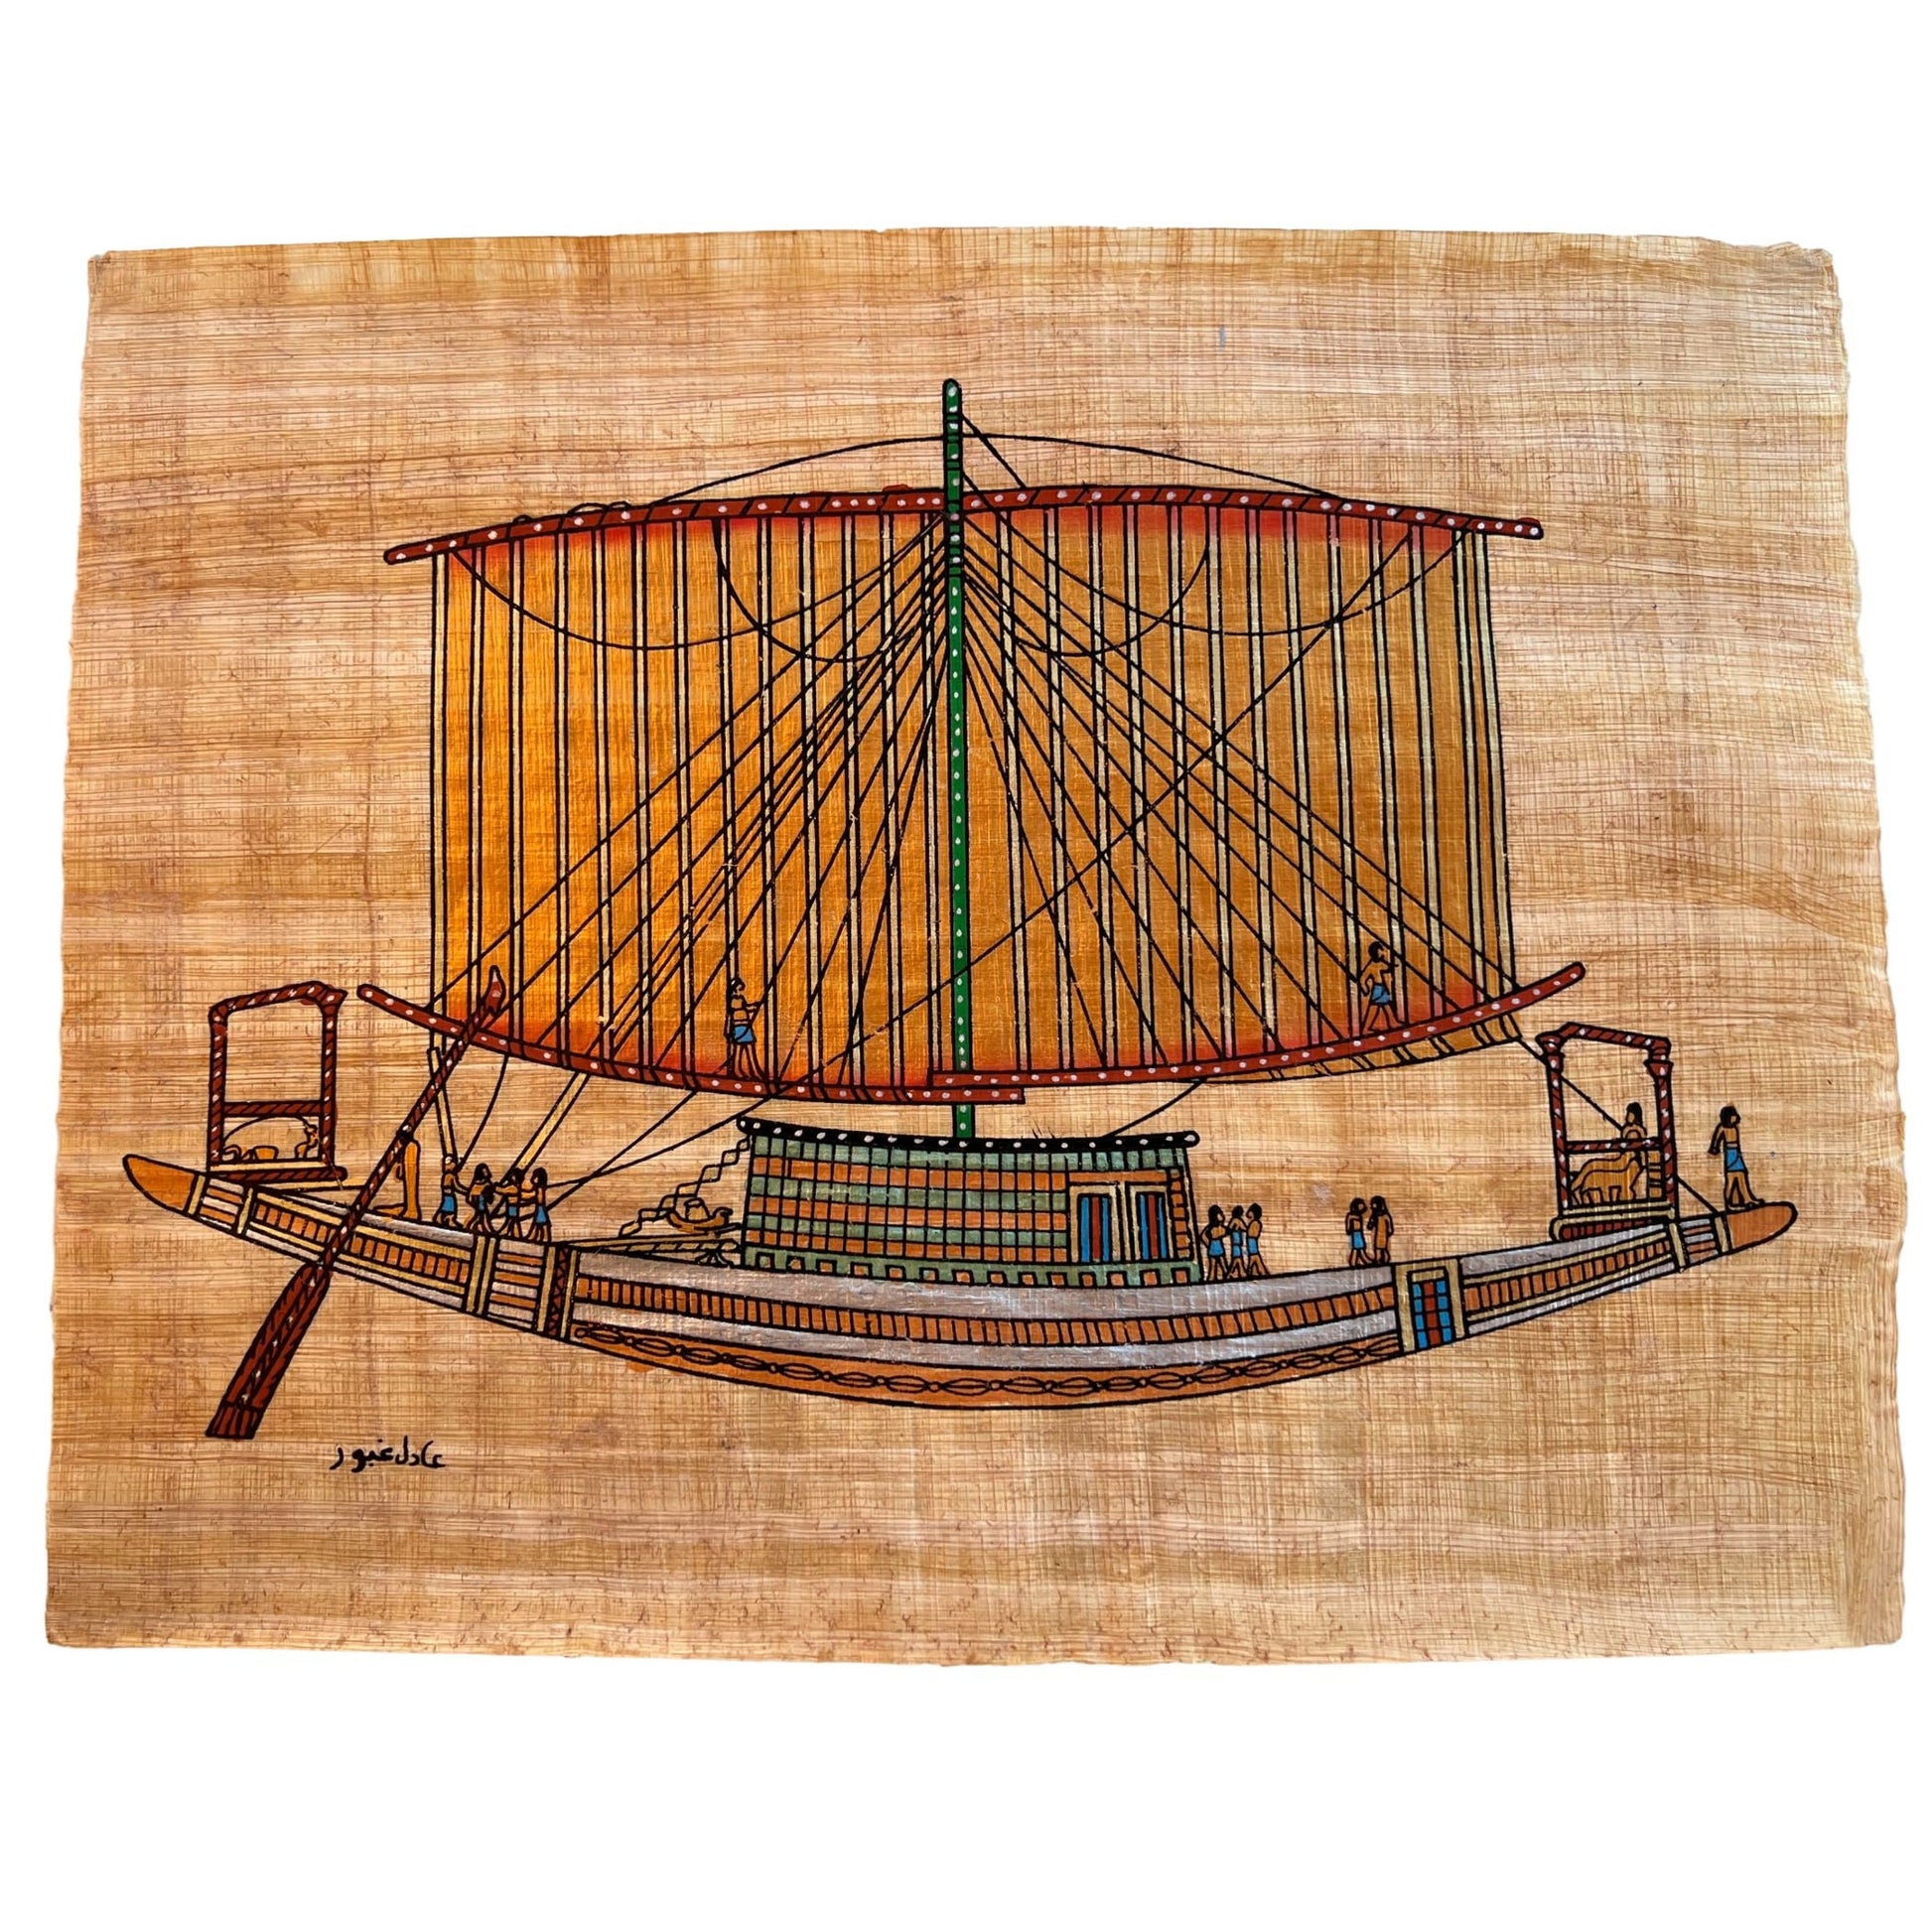 Sailing Boat of Ancient Egyptian, Egypt Papyrus Art Wall Decor